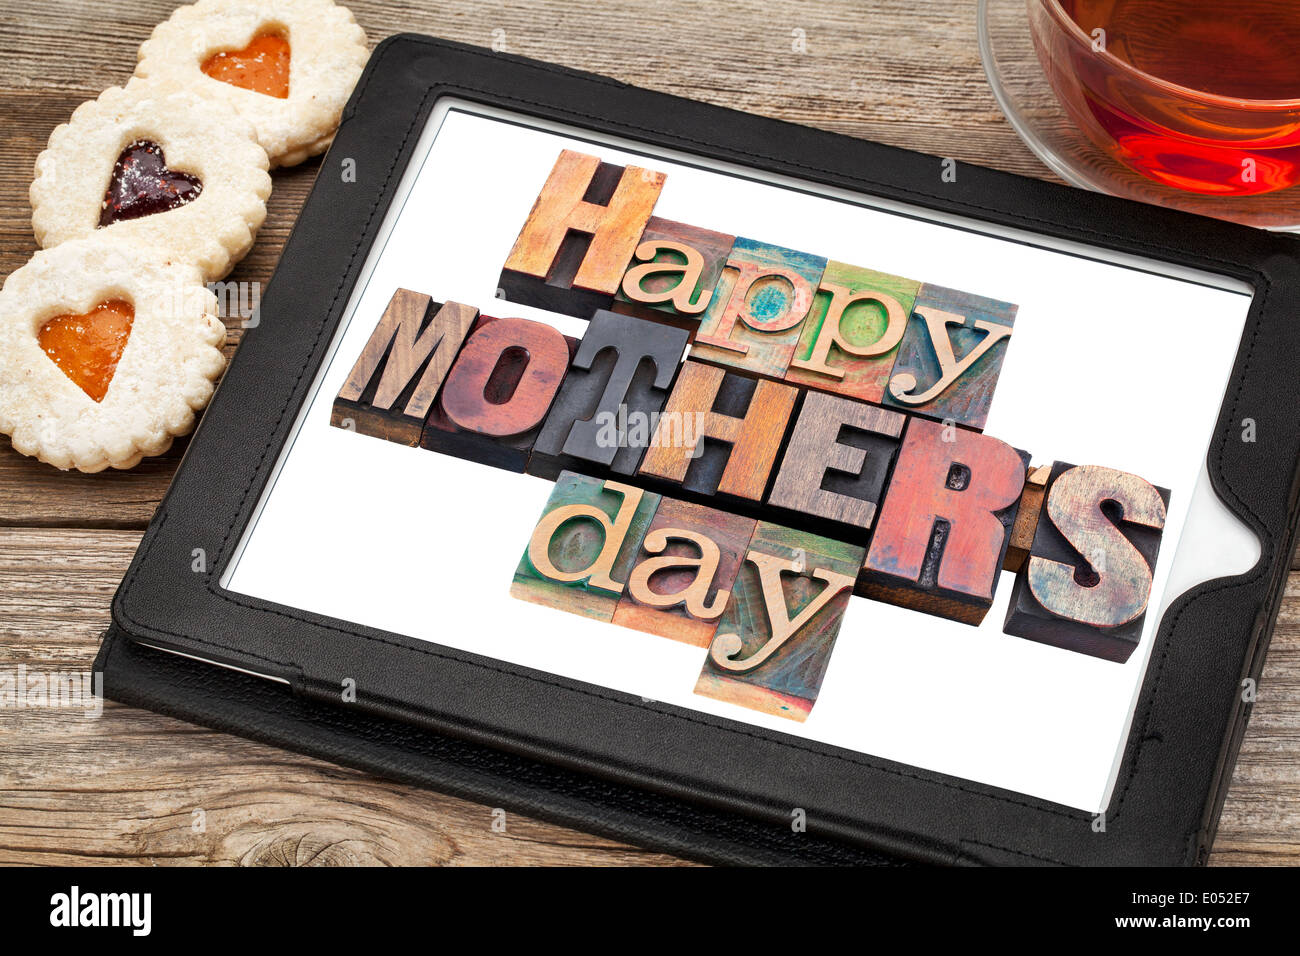 Happy Mother Day in vintage letterpress wood type on a digital tablet with a cup of tea and heart cookies Stock Photo